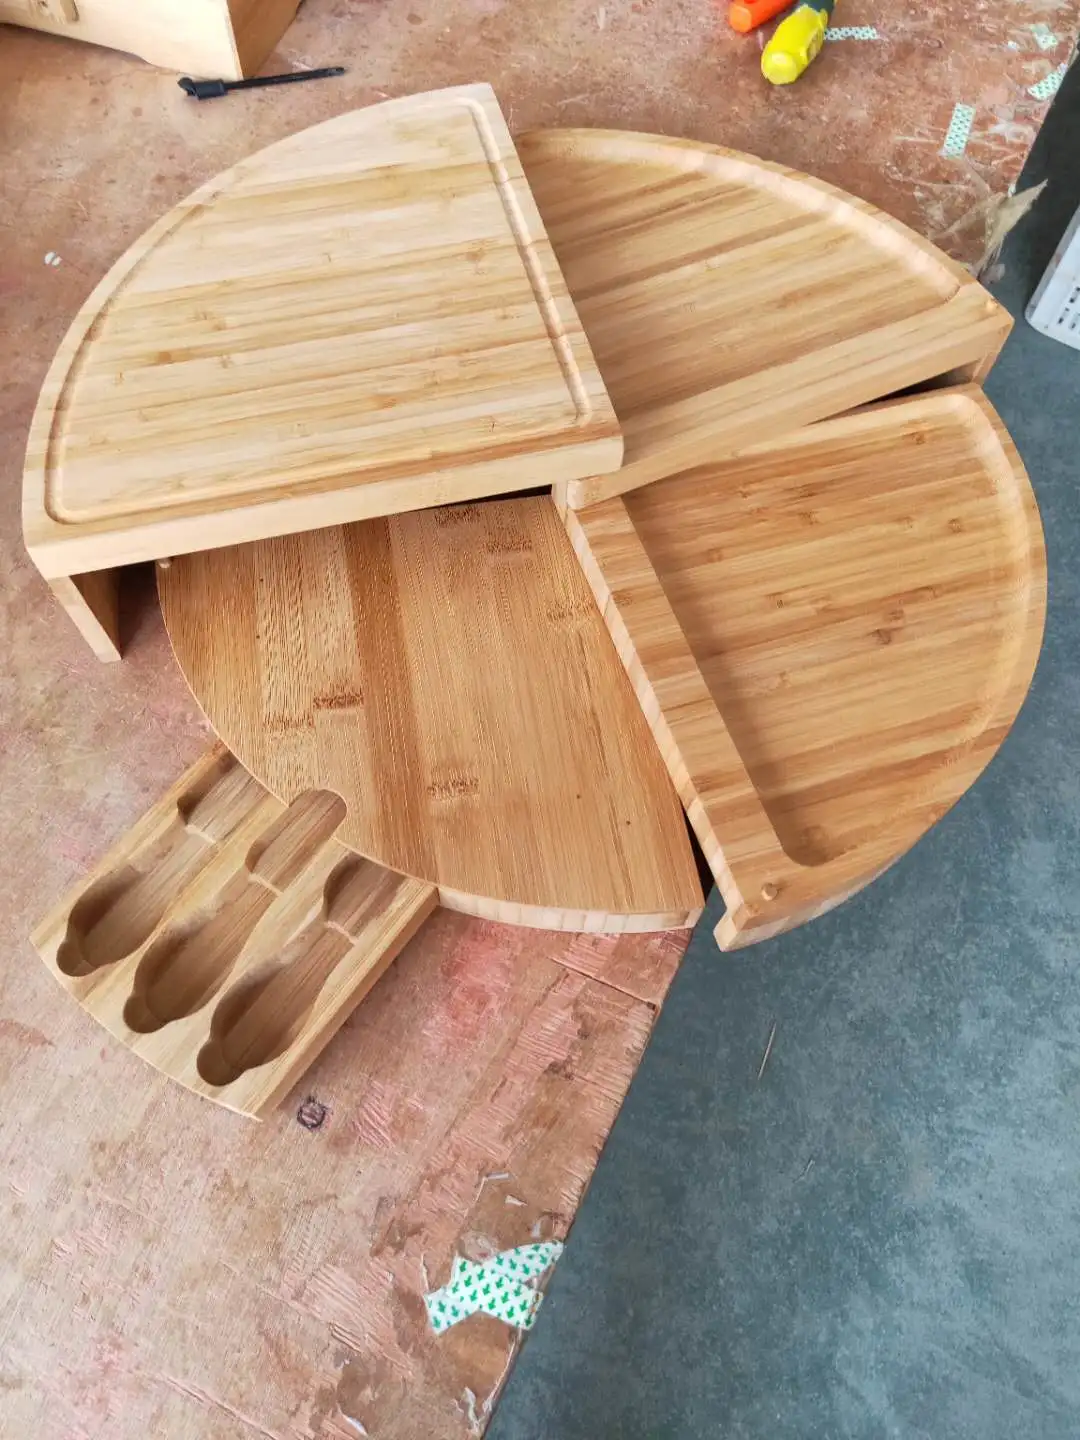 Customized High Quality Bamboo Cutting Board with Cheese Tools - Spirals from a Compact Wedge to 18